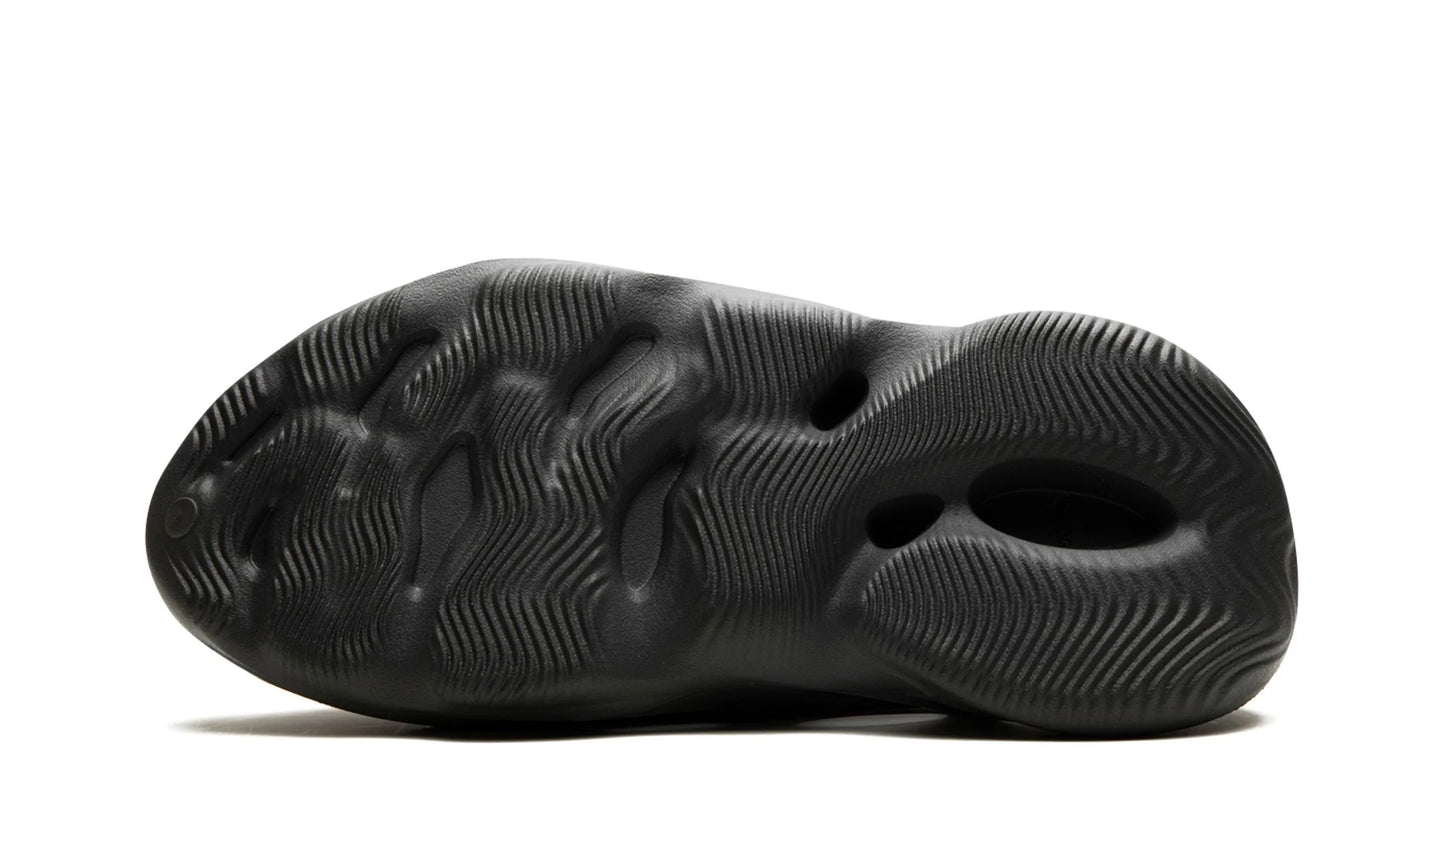 Yeezy Foam Runner Carbon Bottom Outsole View